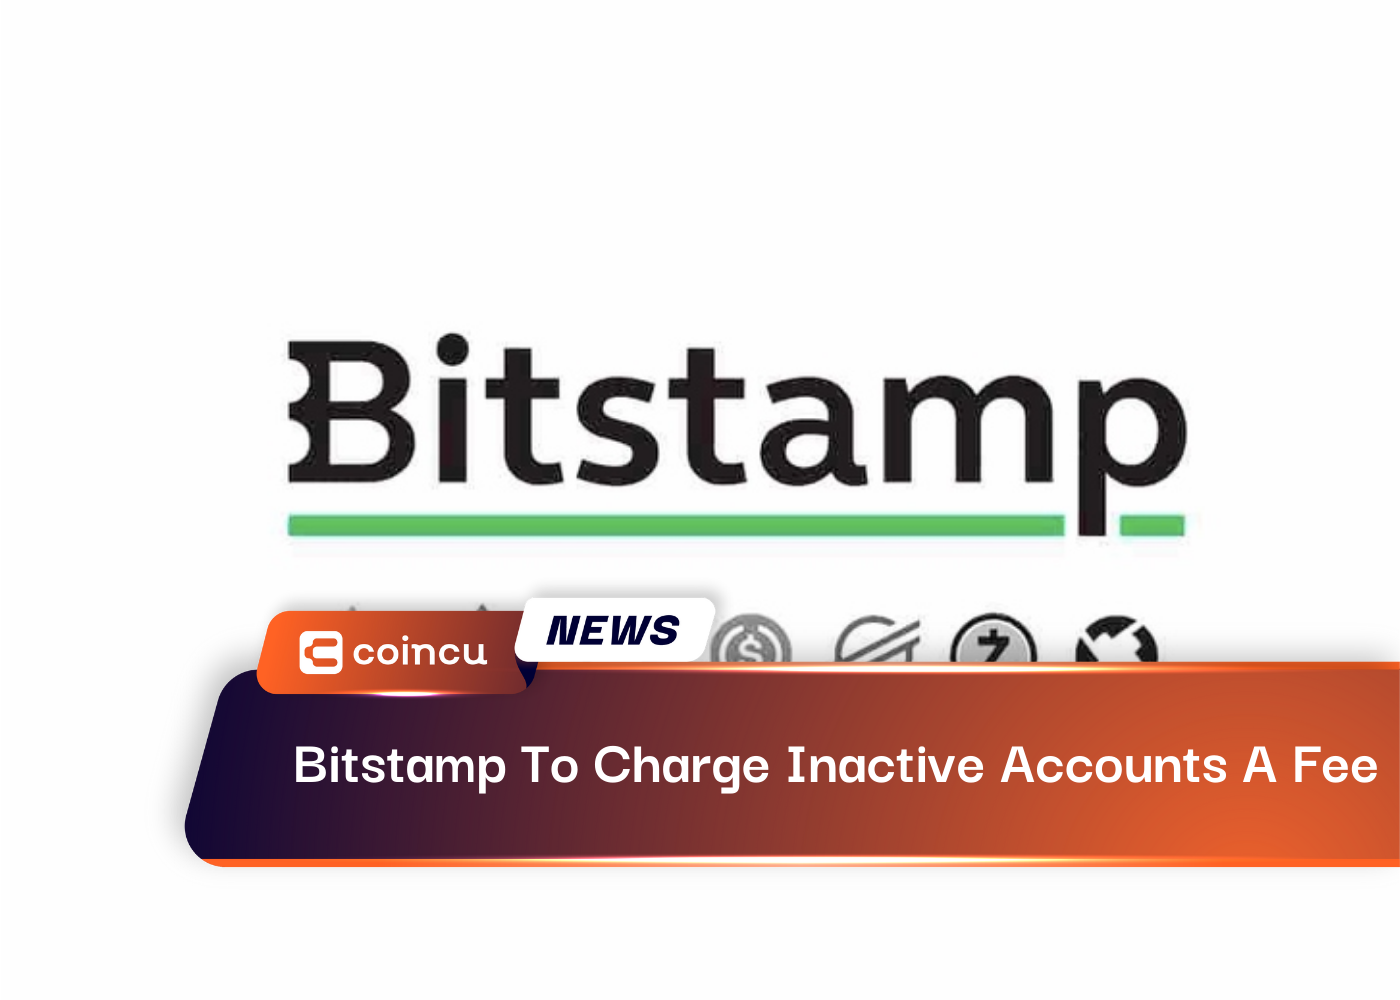 Bitstamp To Charge Inactive Accounts A Fee